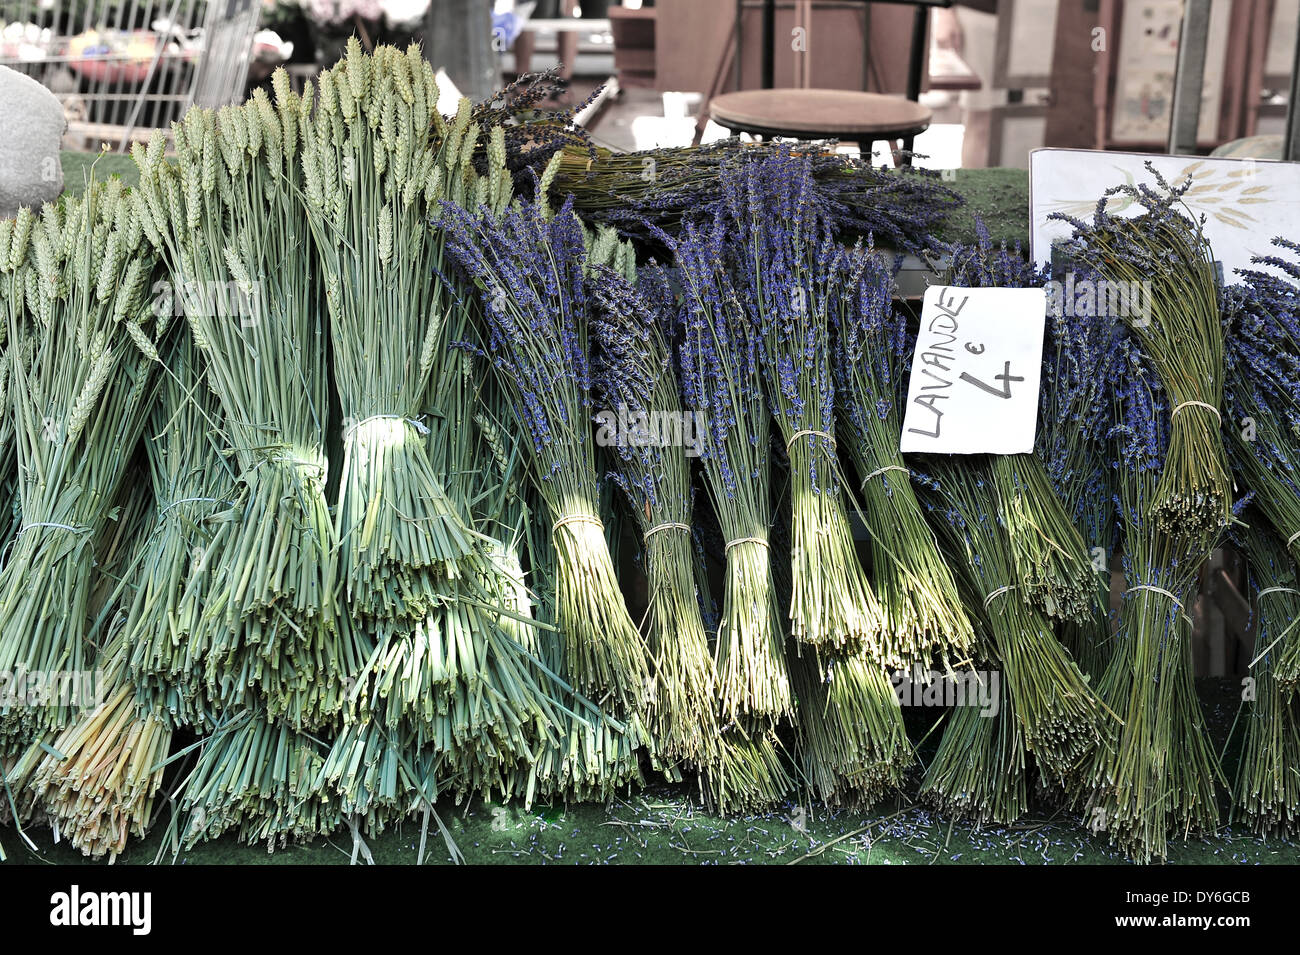 lavender and corn bunches. farmer market in Nice, Provence, France Stock Photo